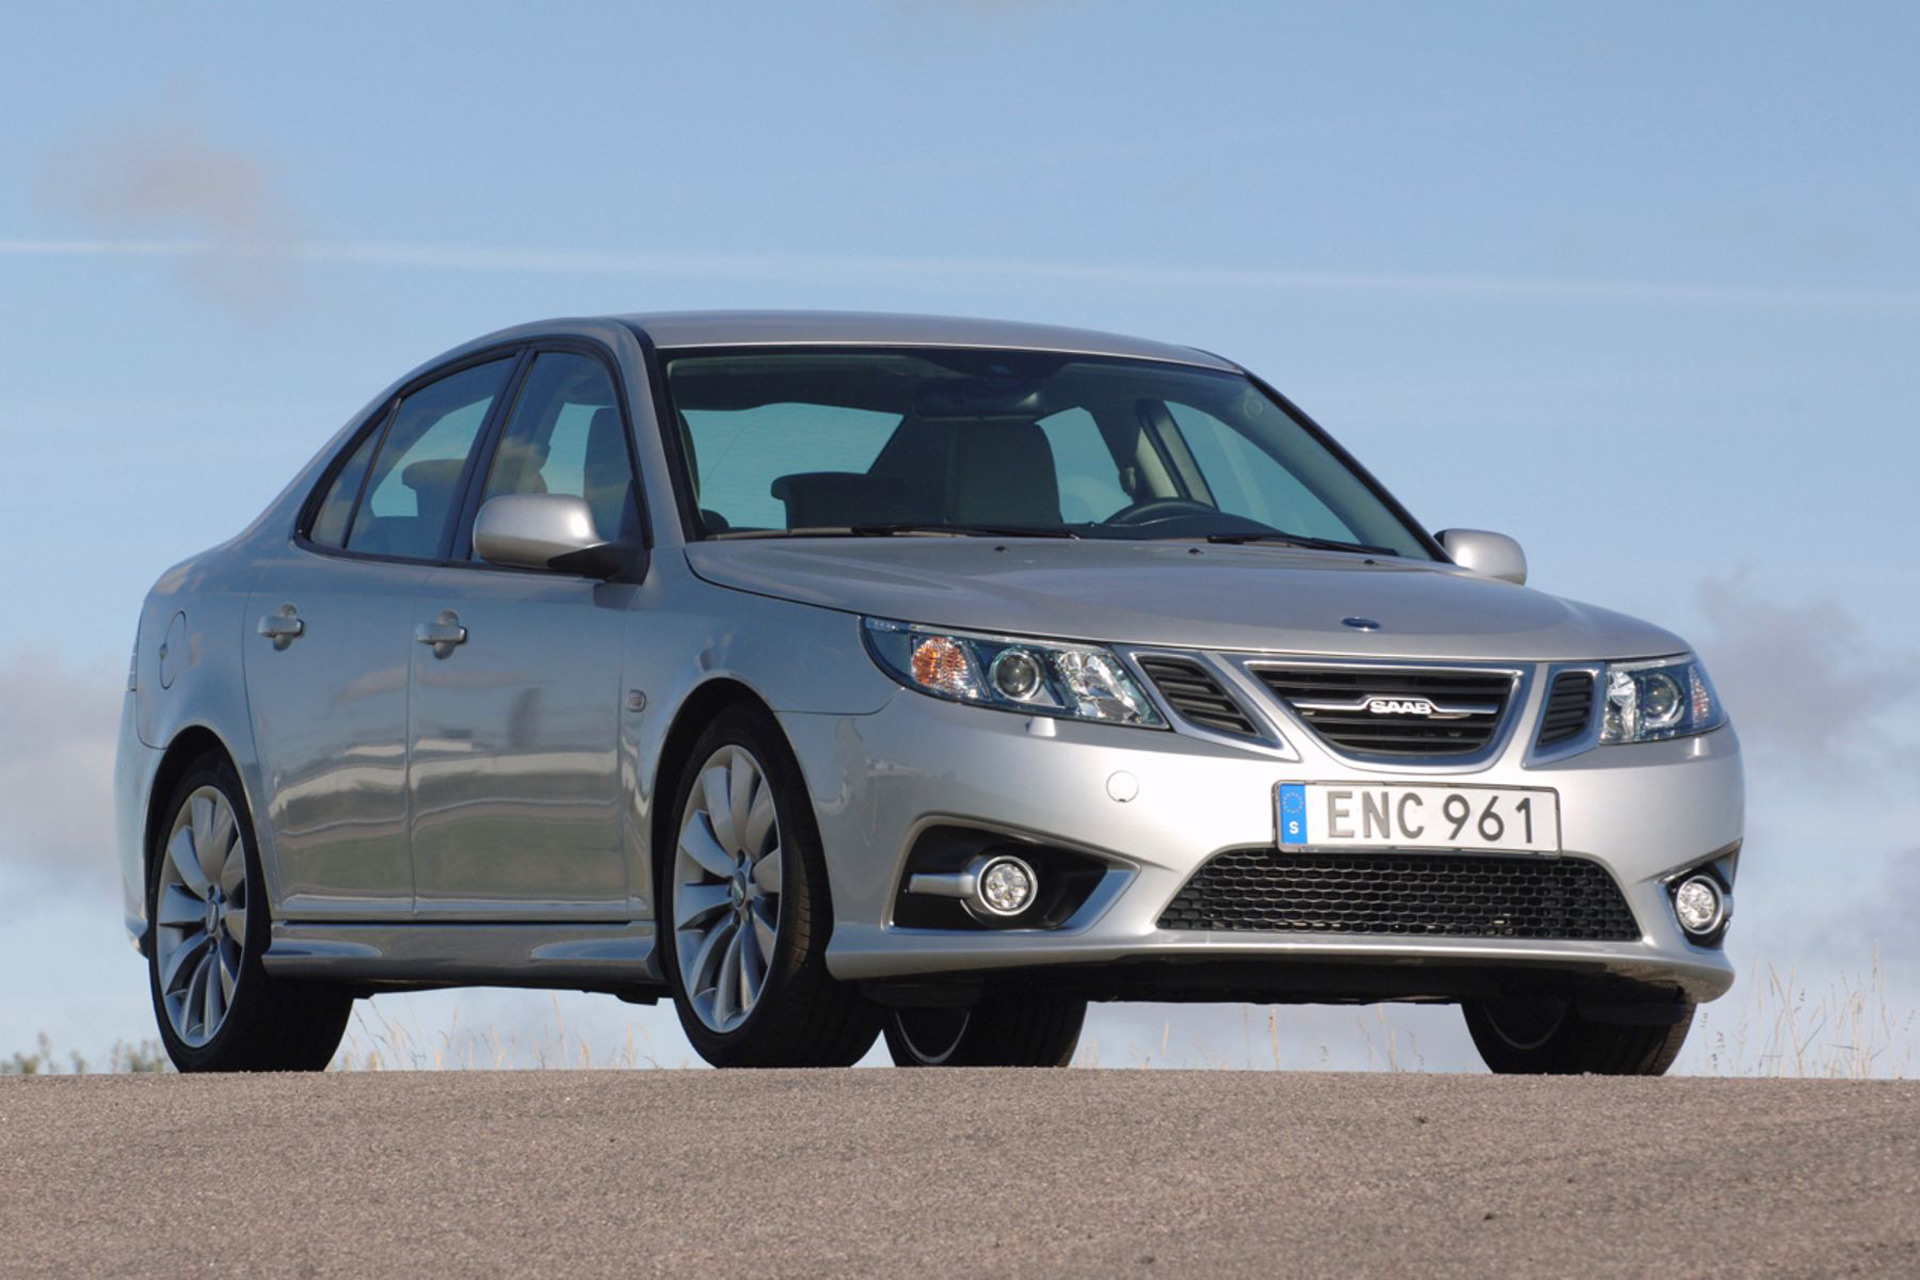 The last production Saab sells for $47,850